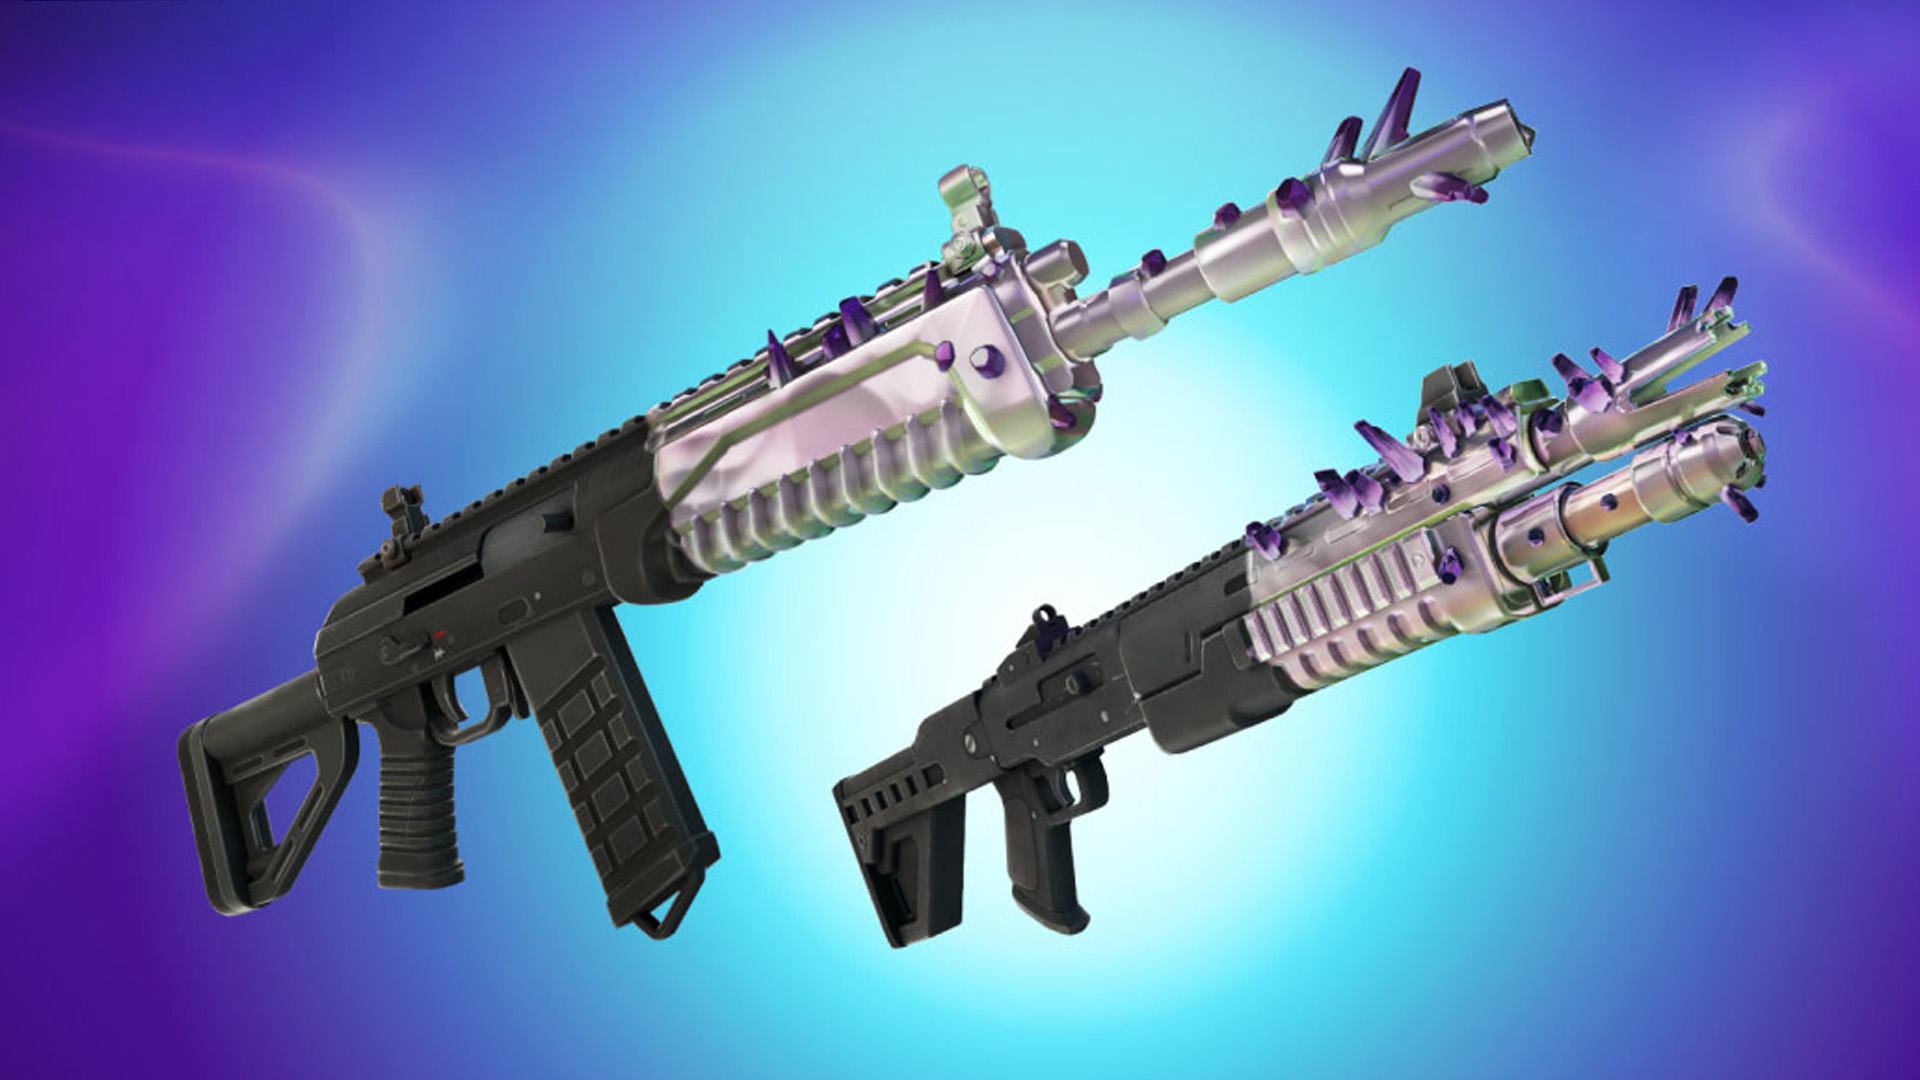 How To Evolve Evochrome Weapons In Fortnite?